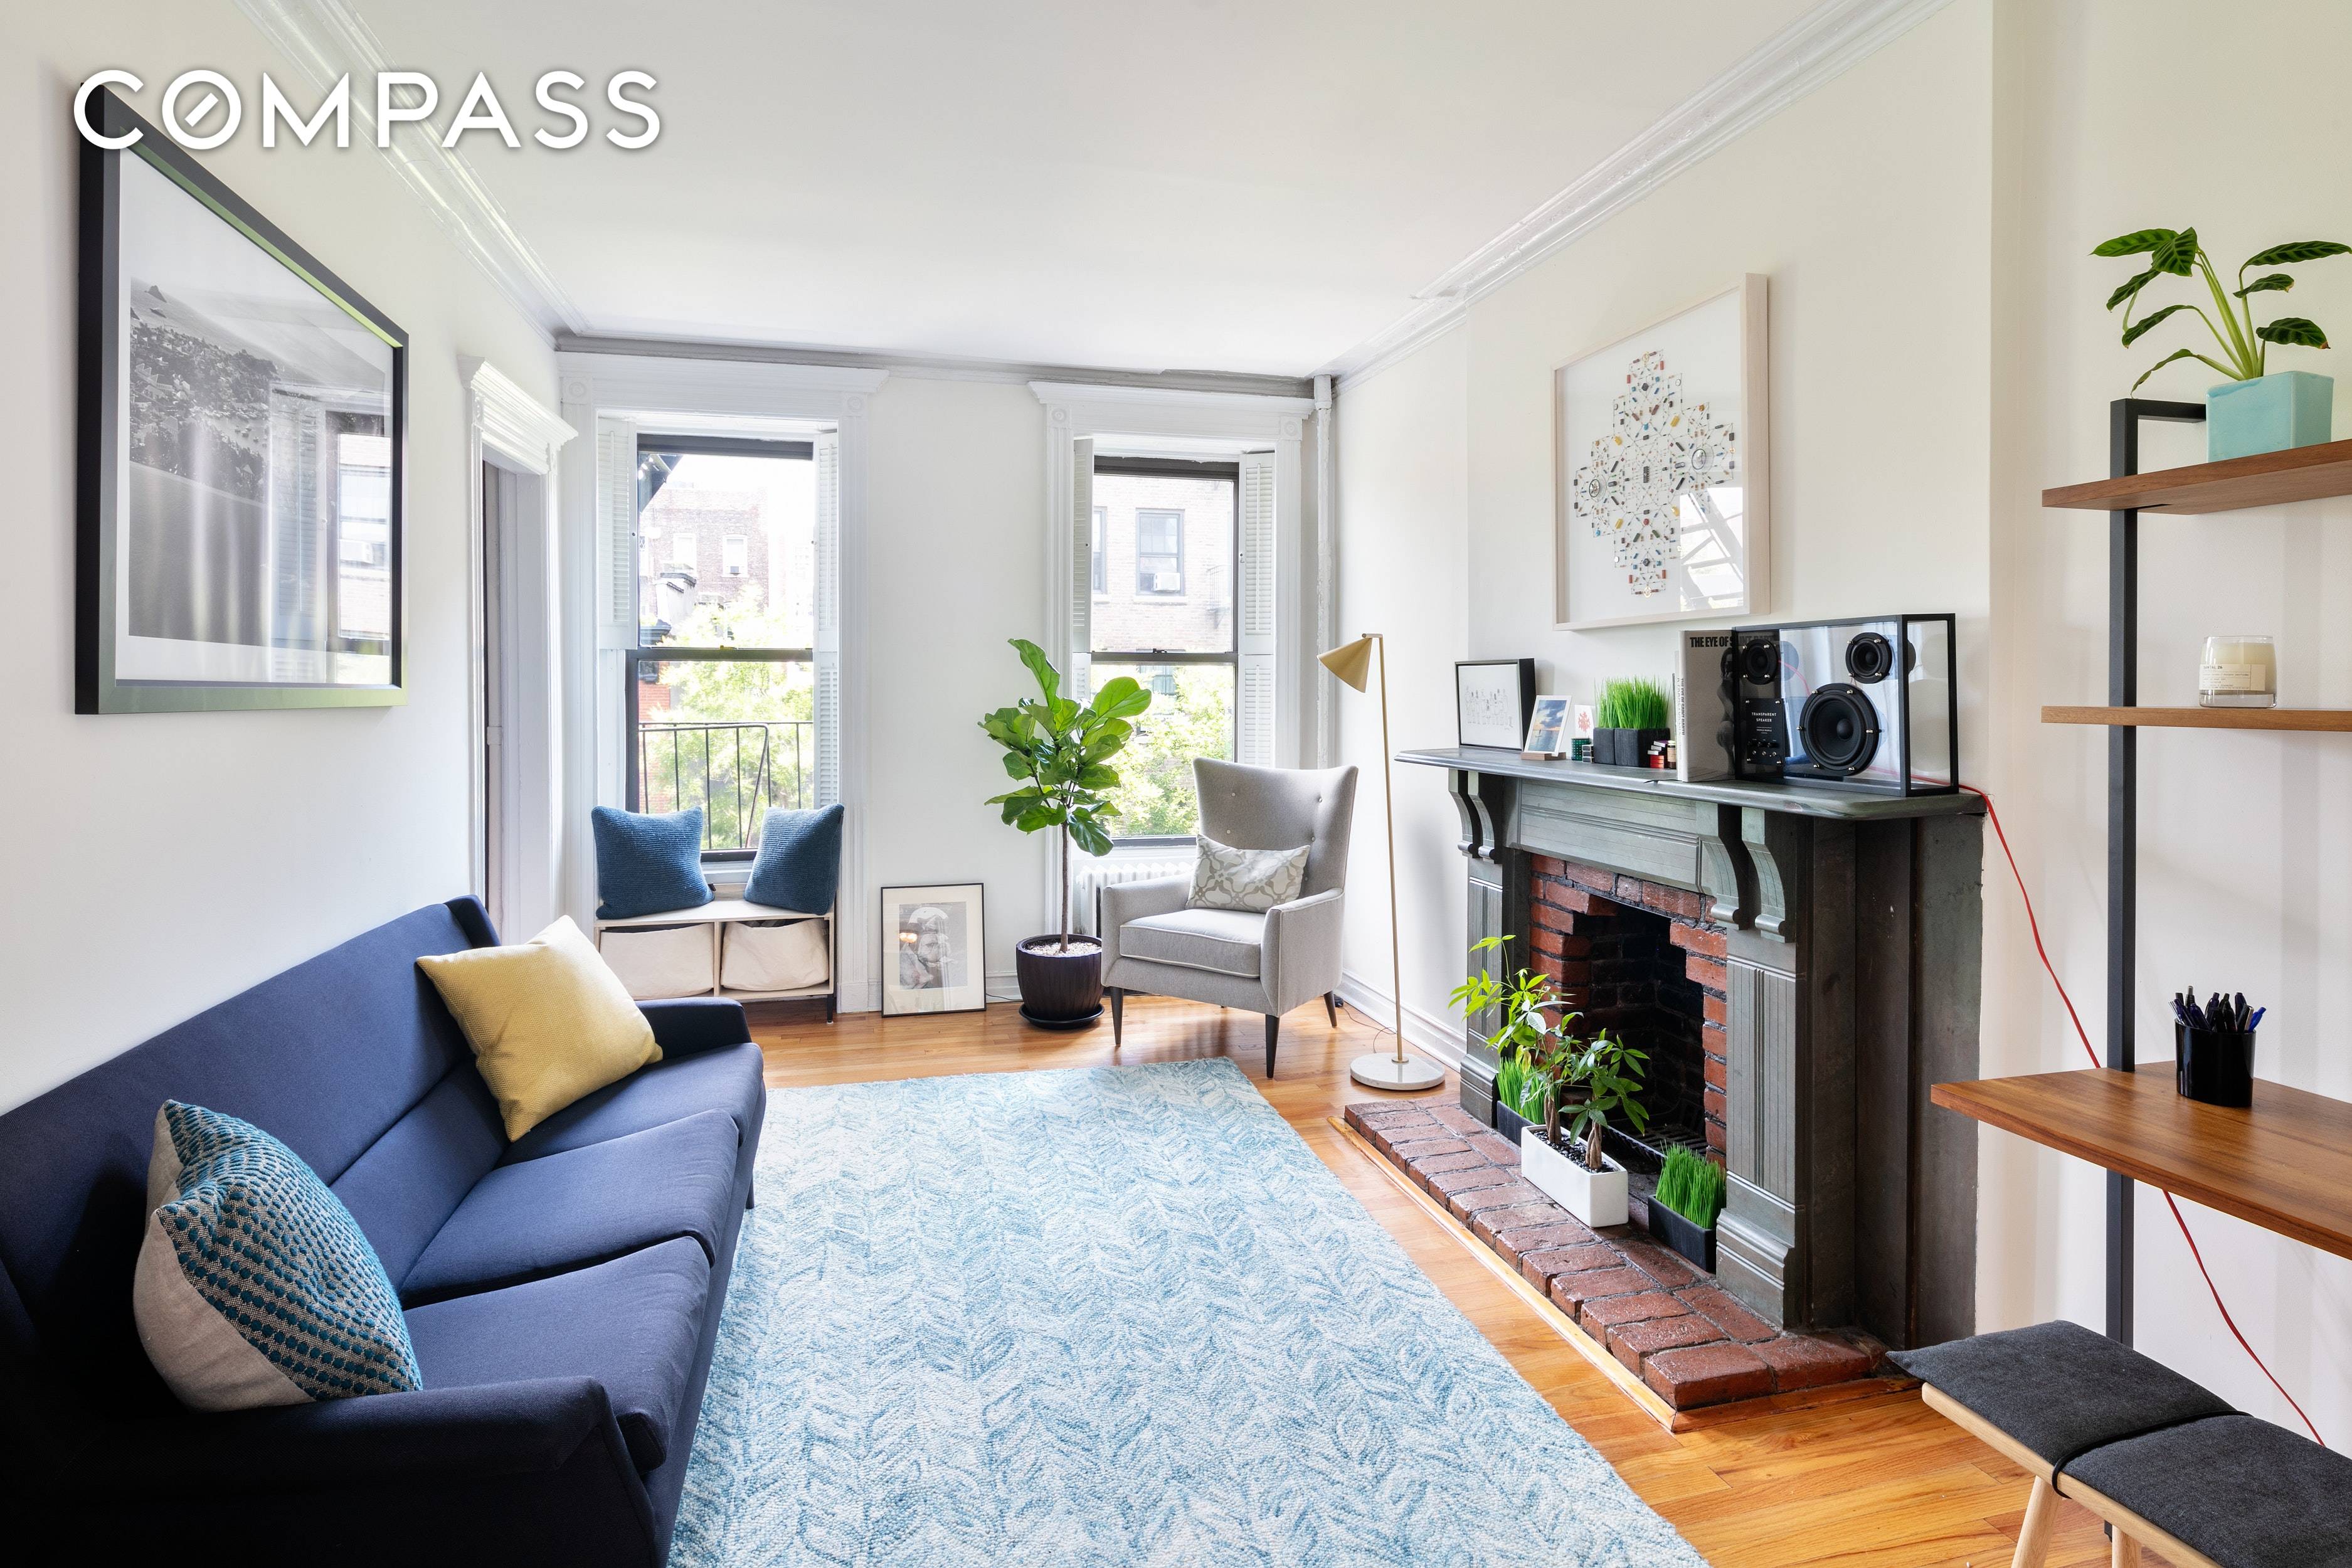 This light filled, charming one bedroom home opens into a bright, north facing living room with 9ft ceilings, crown molding, and a fireplace with a slate mantel.